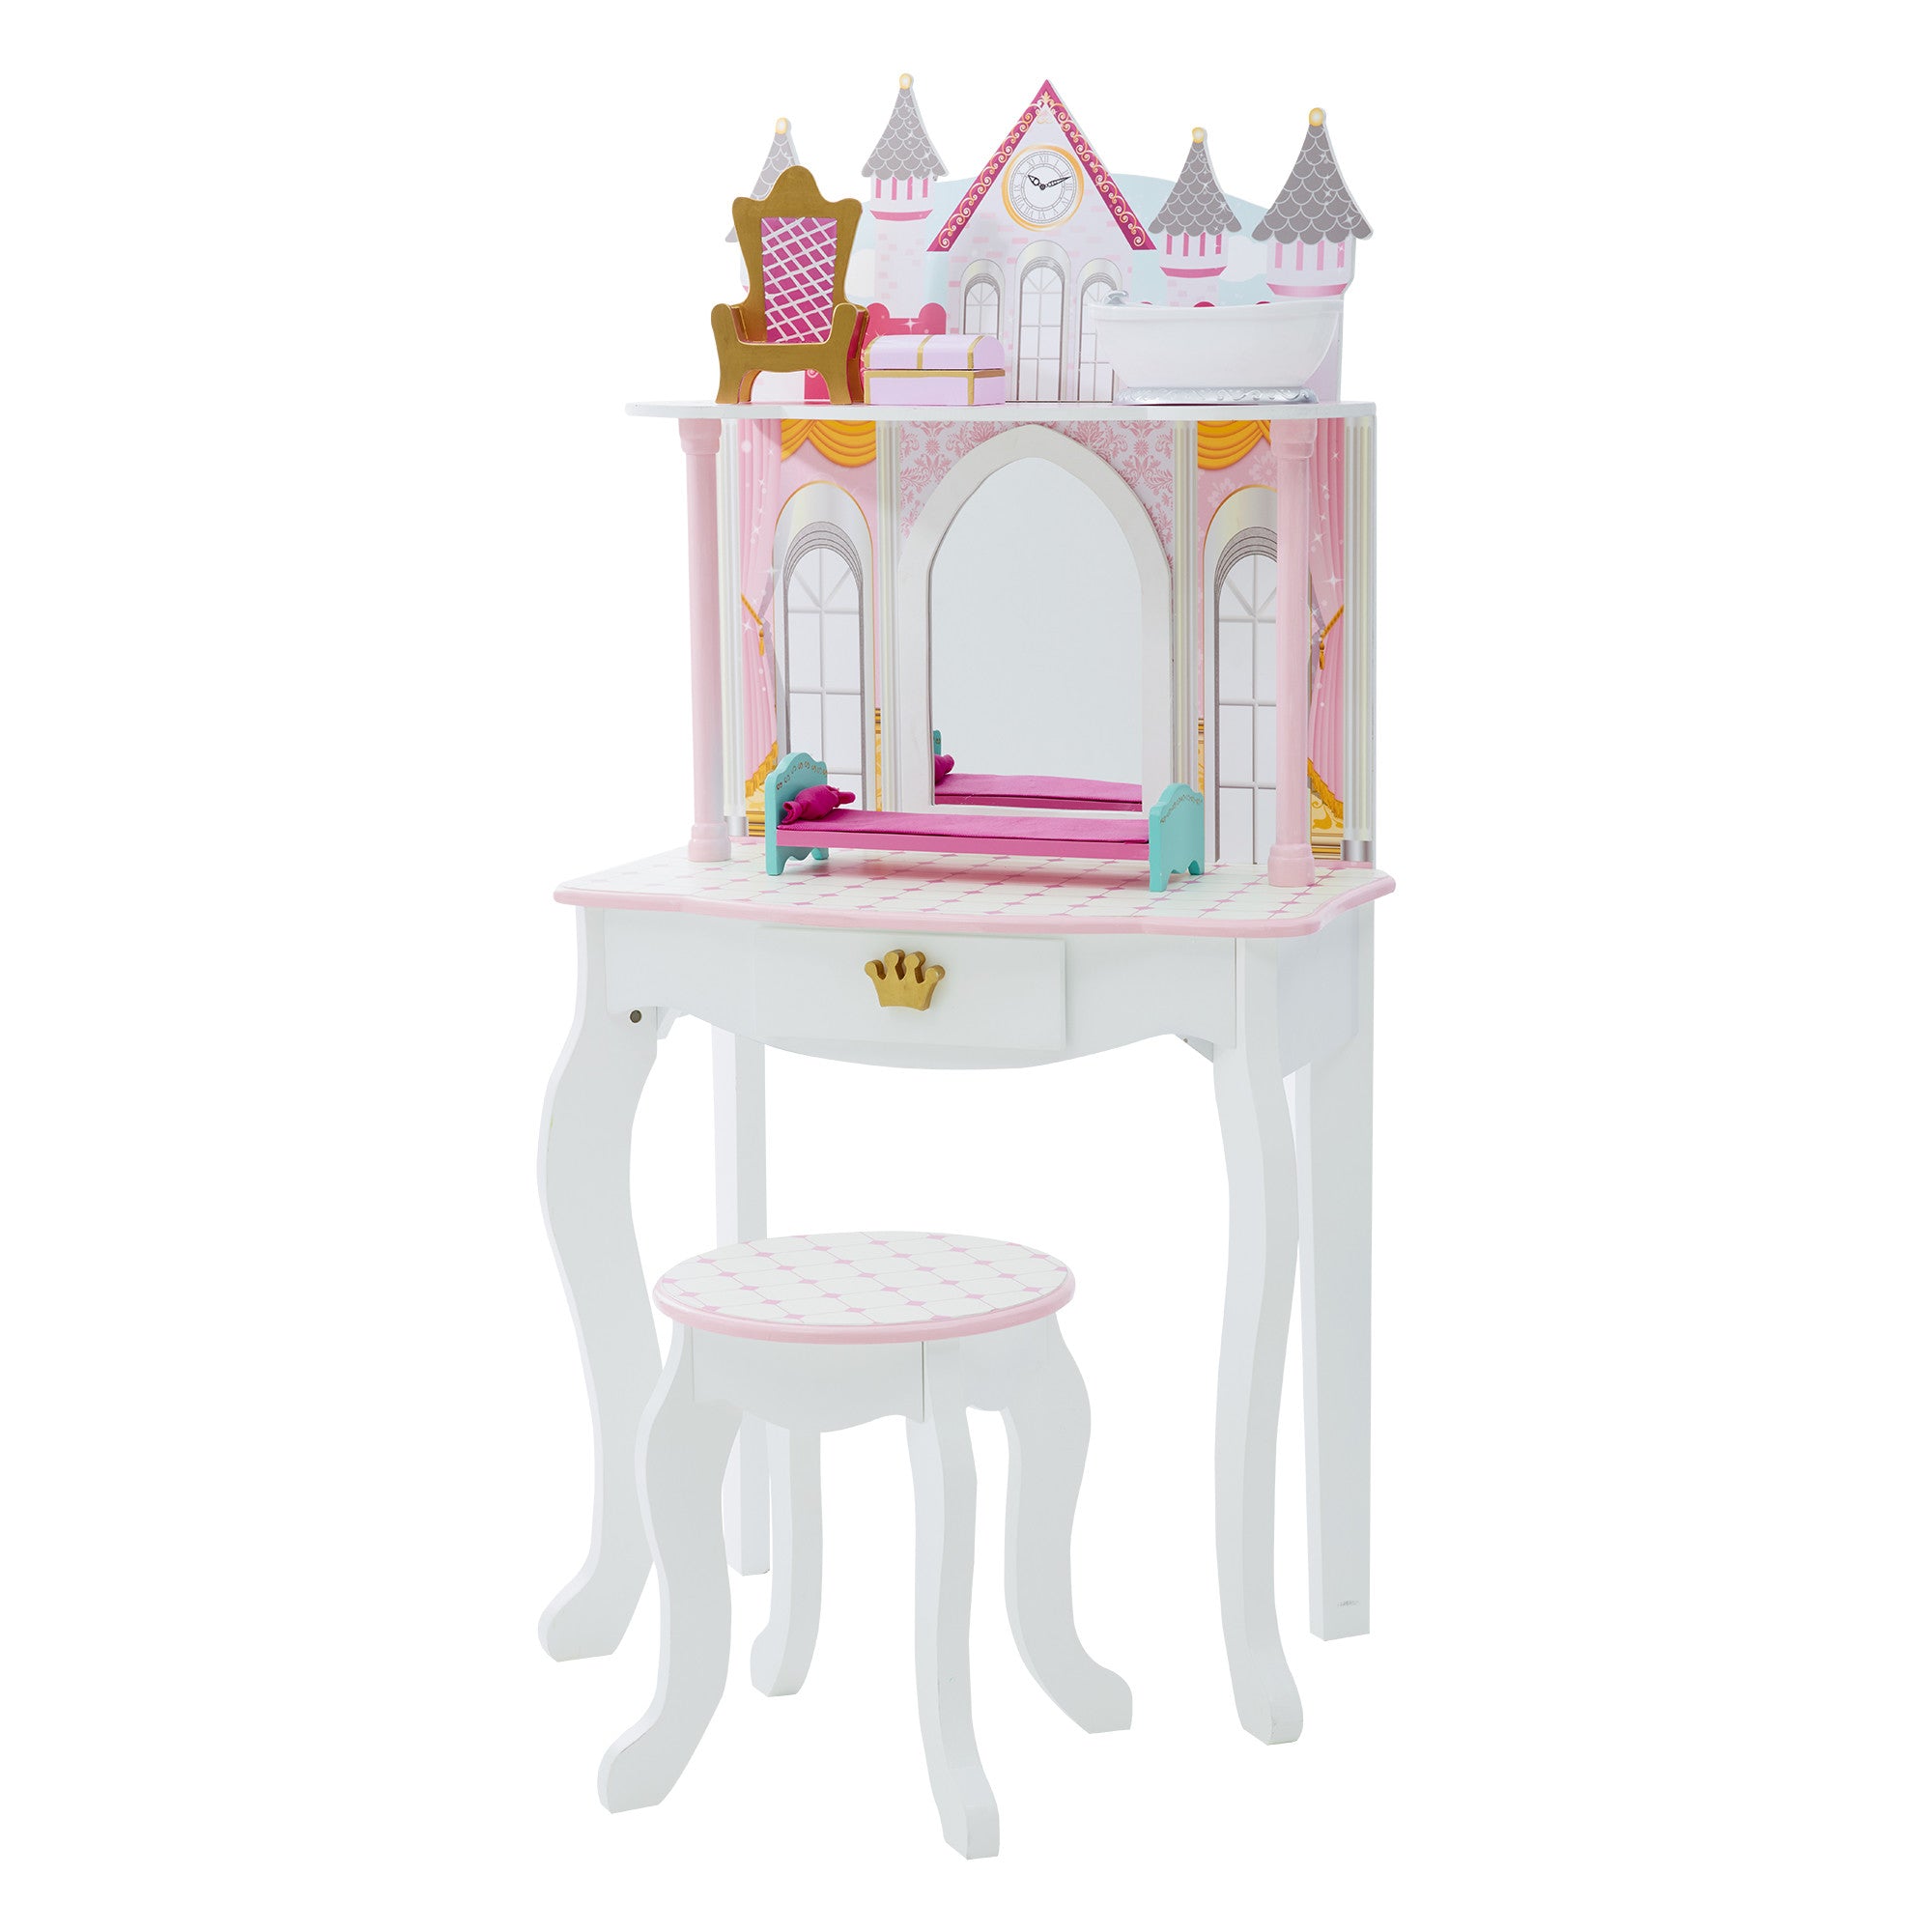 Princess castle vanity for kids. Top of the vanity looks like a castle with matching accessories. Vanity stool is white with a pink and white design on top. Vanity has a drawer with a crown design on the front. 